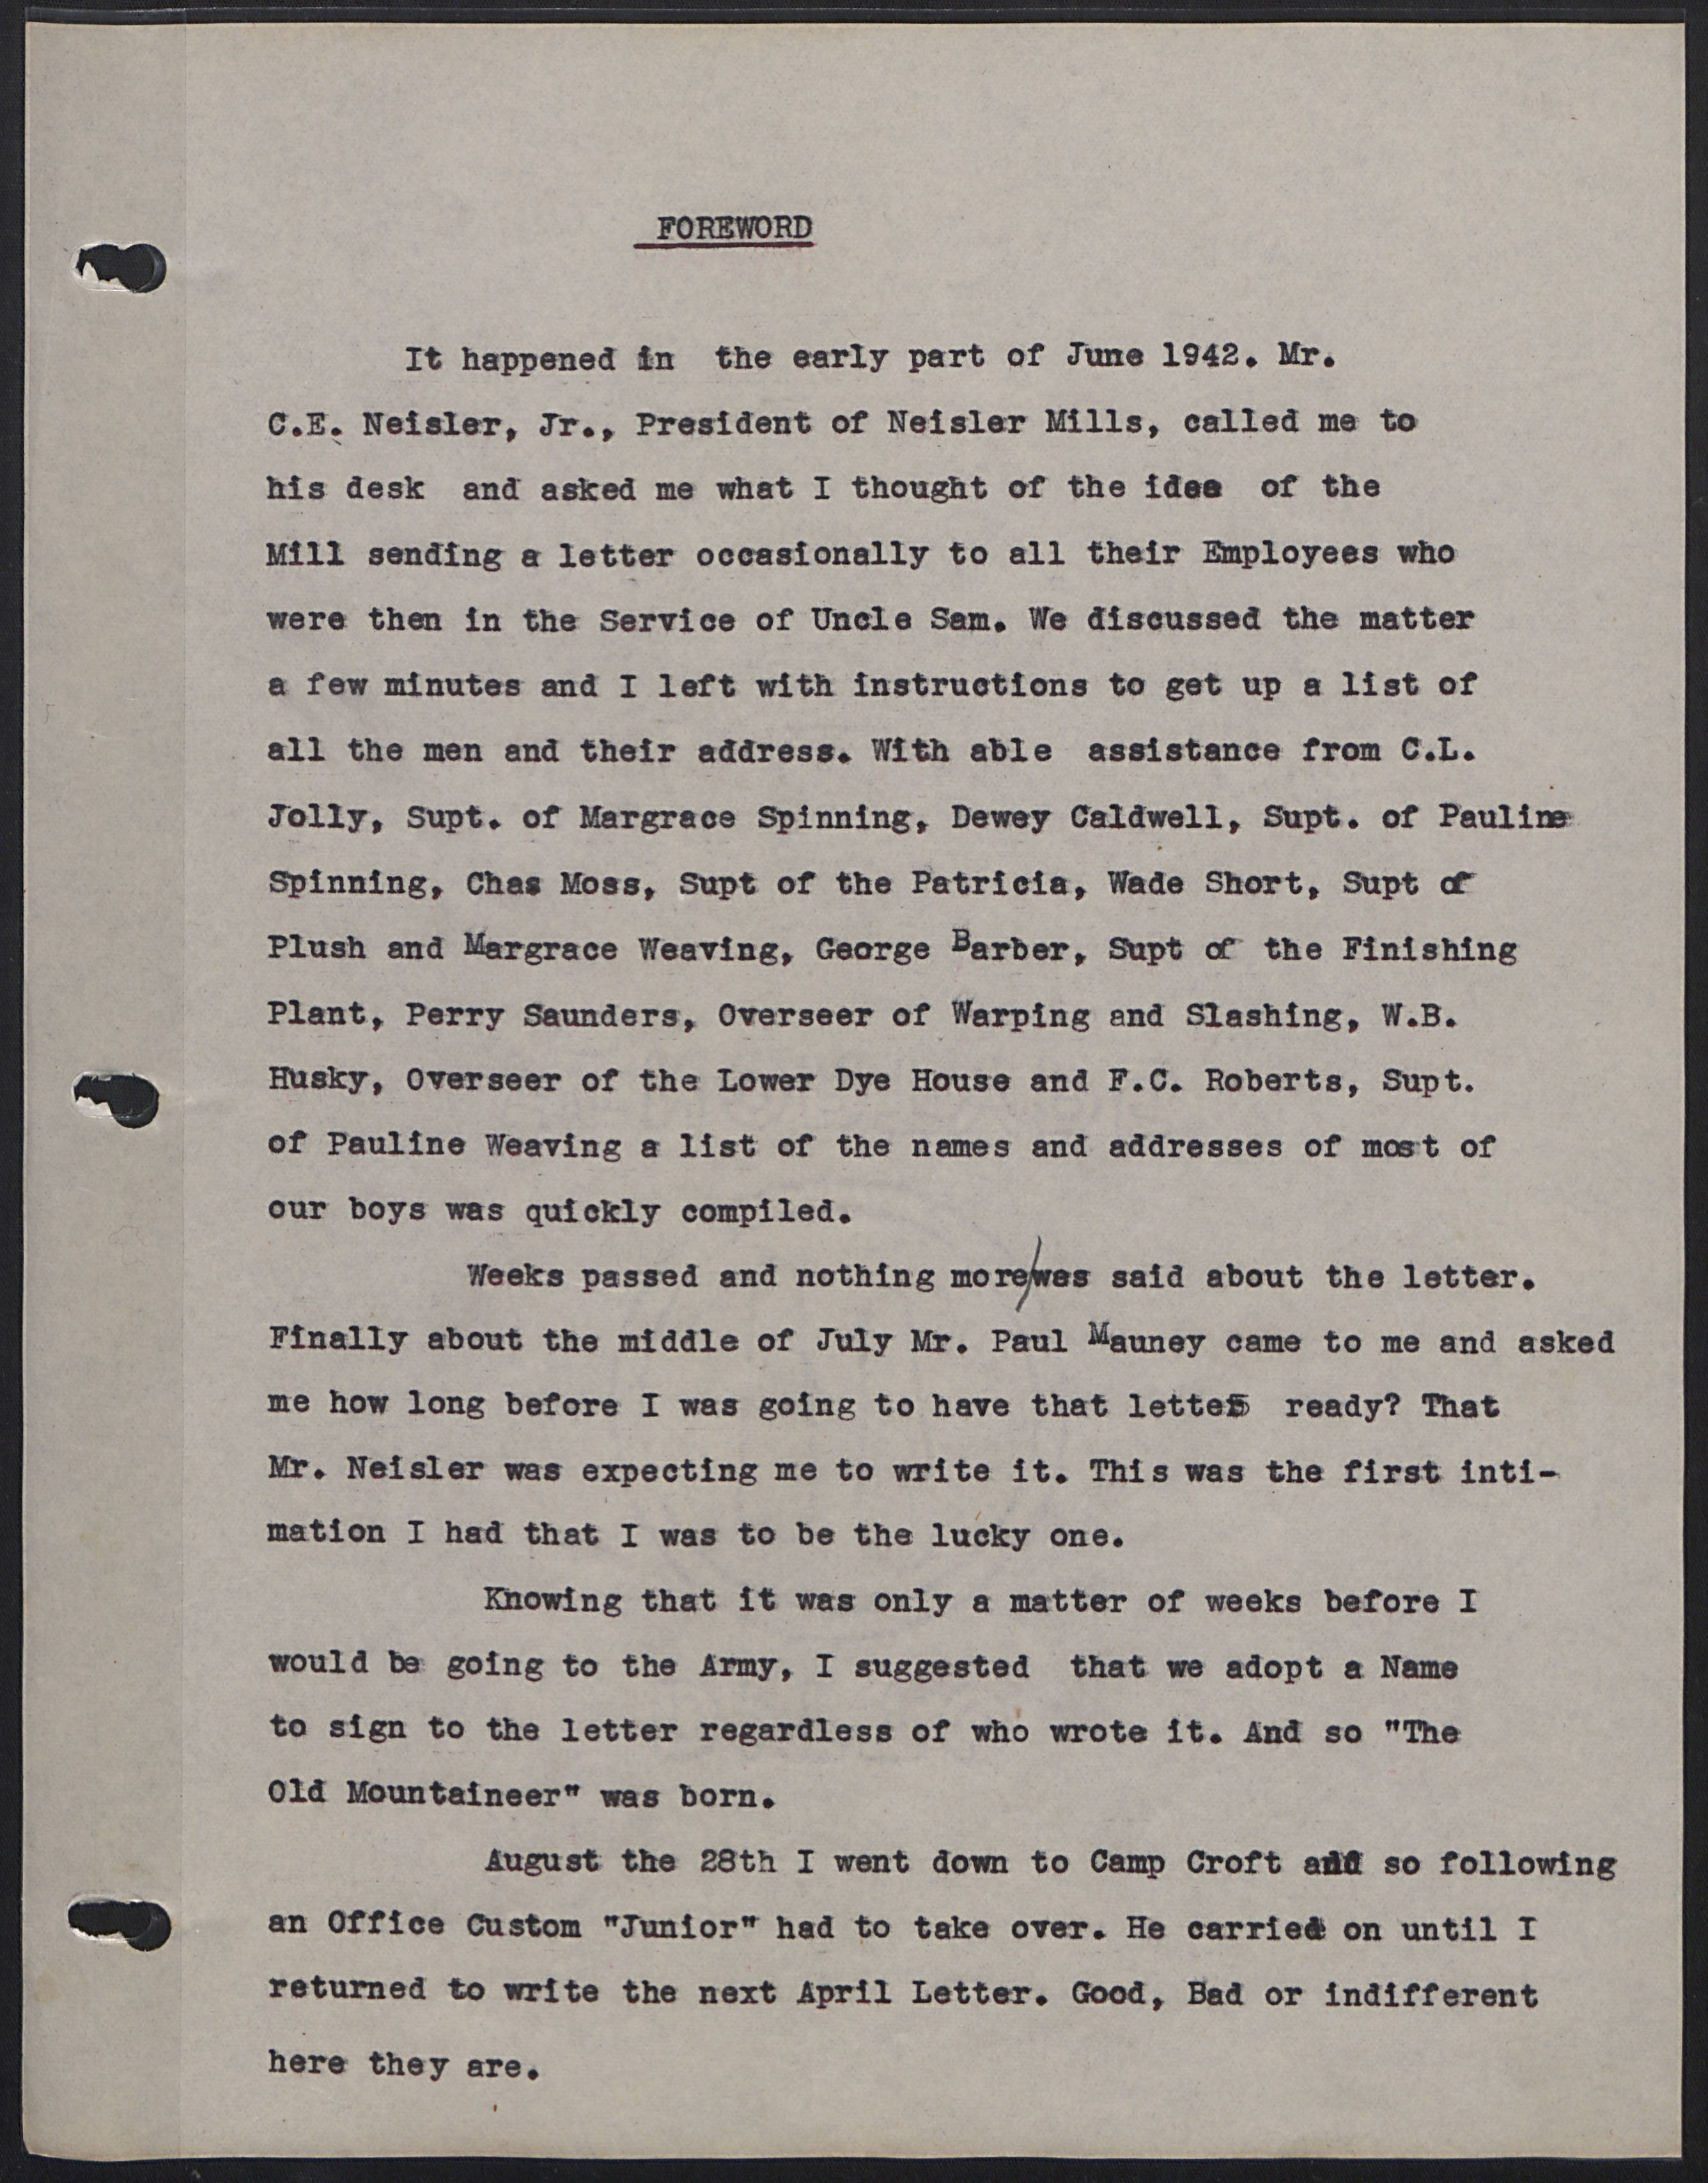 The Old Mountaineer Letters to Servicemen page 4